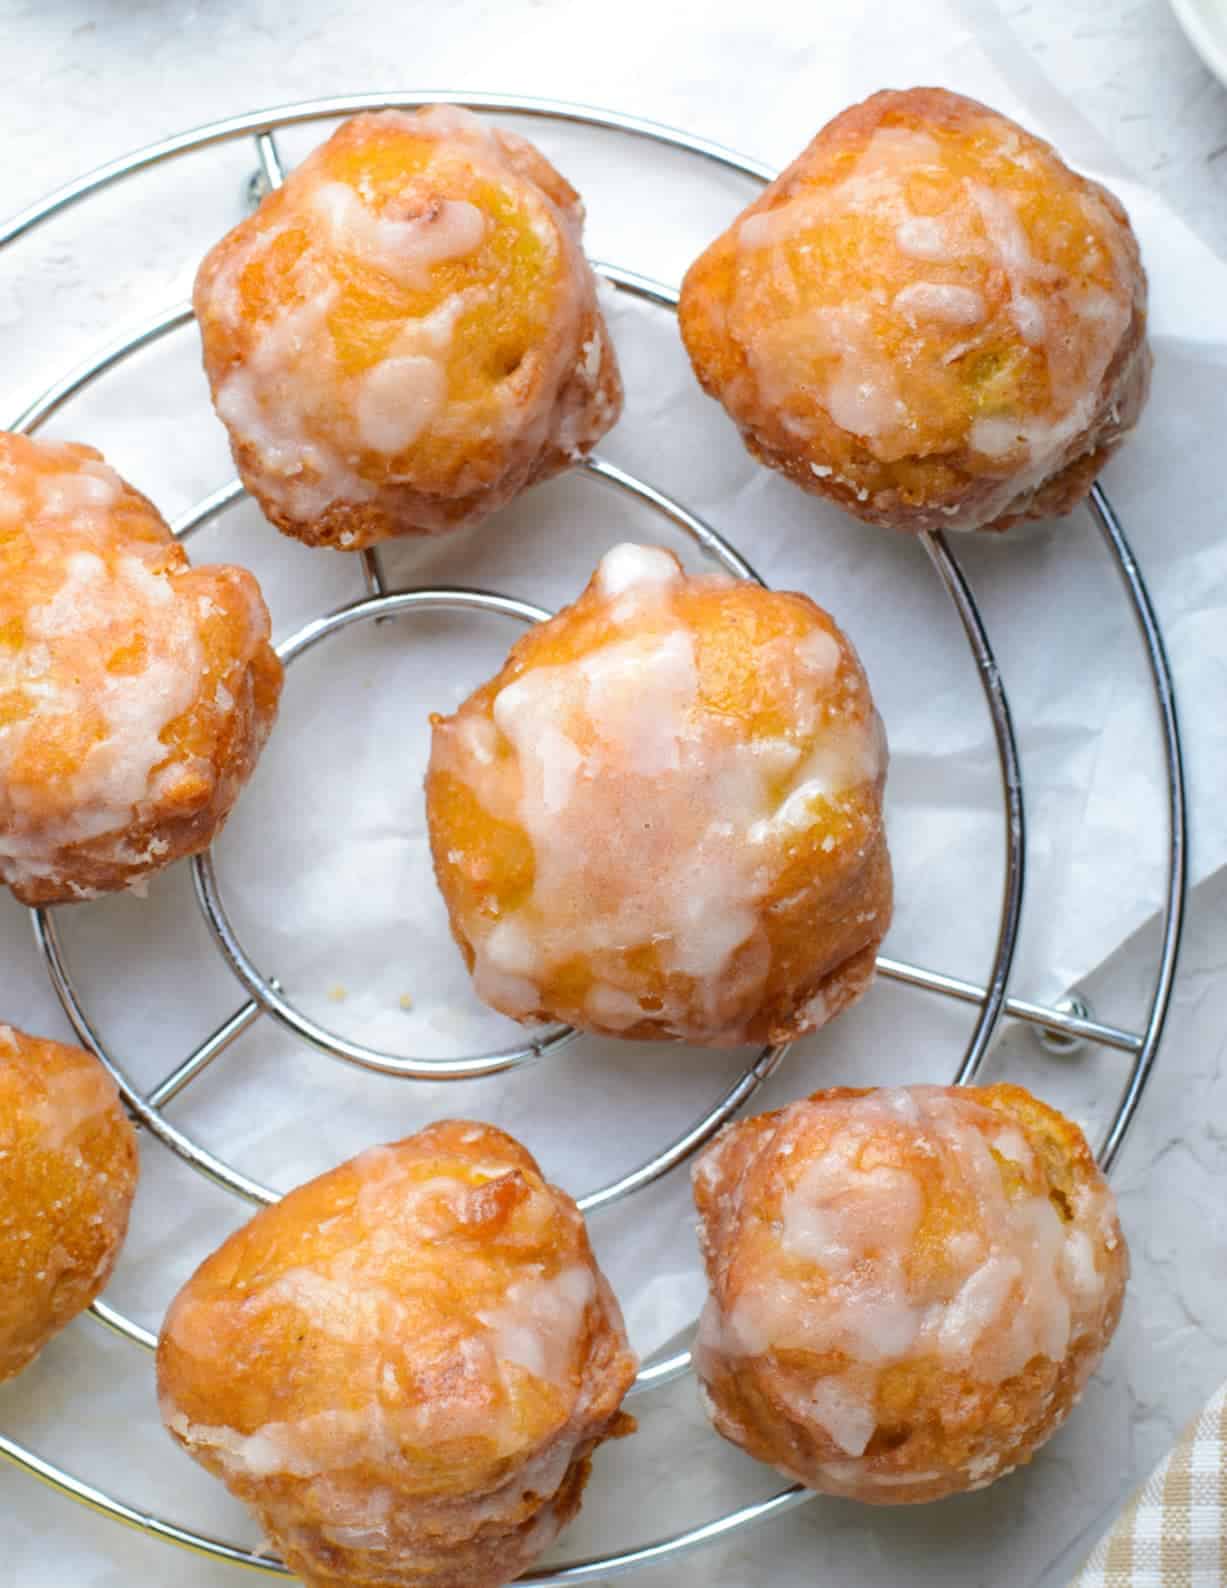 several banana fritters that have been dipped in glaze on a cooling rack.